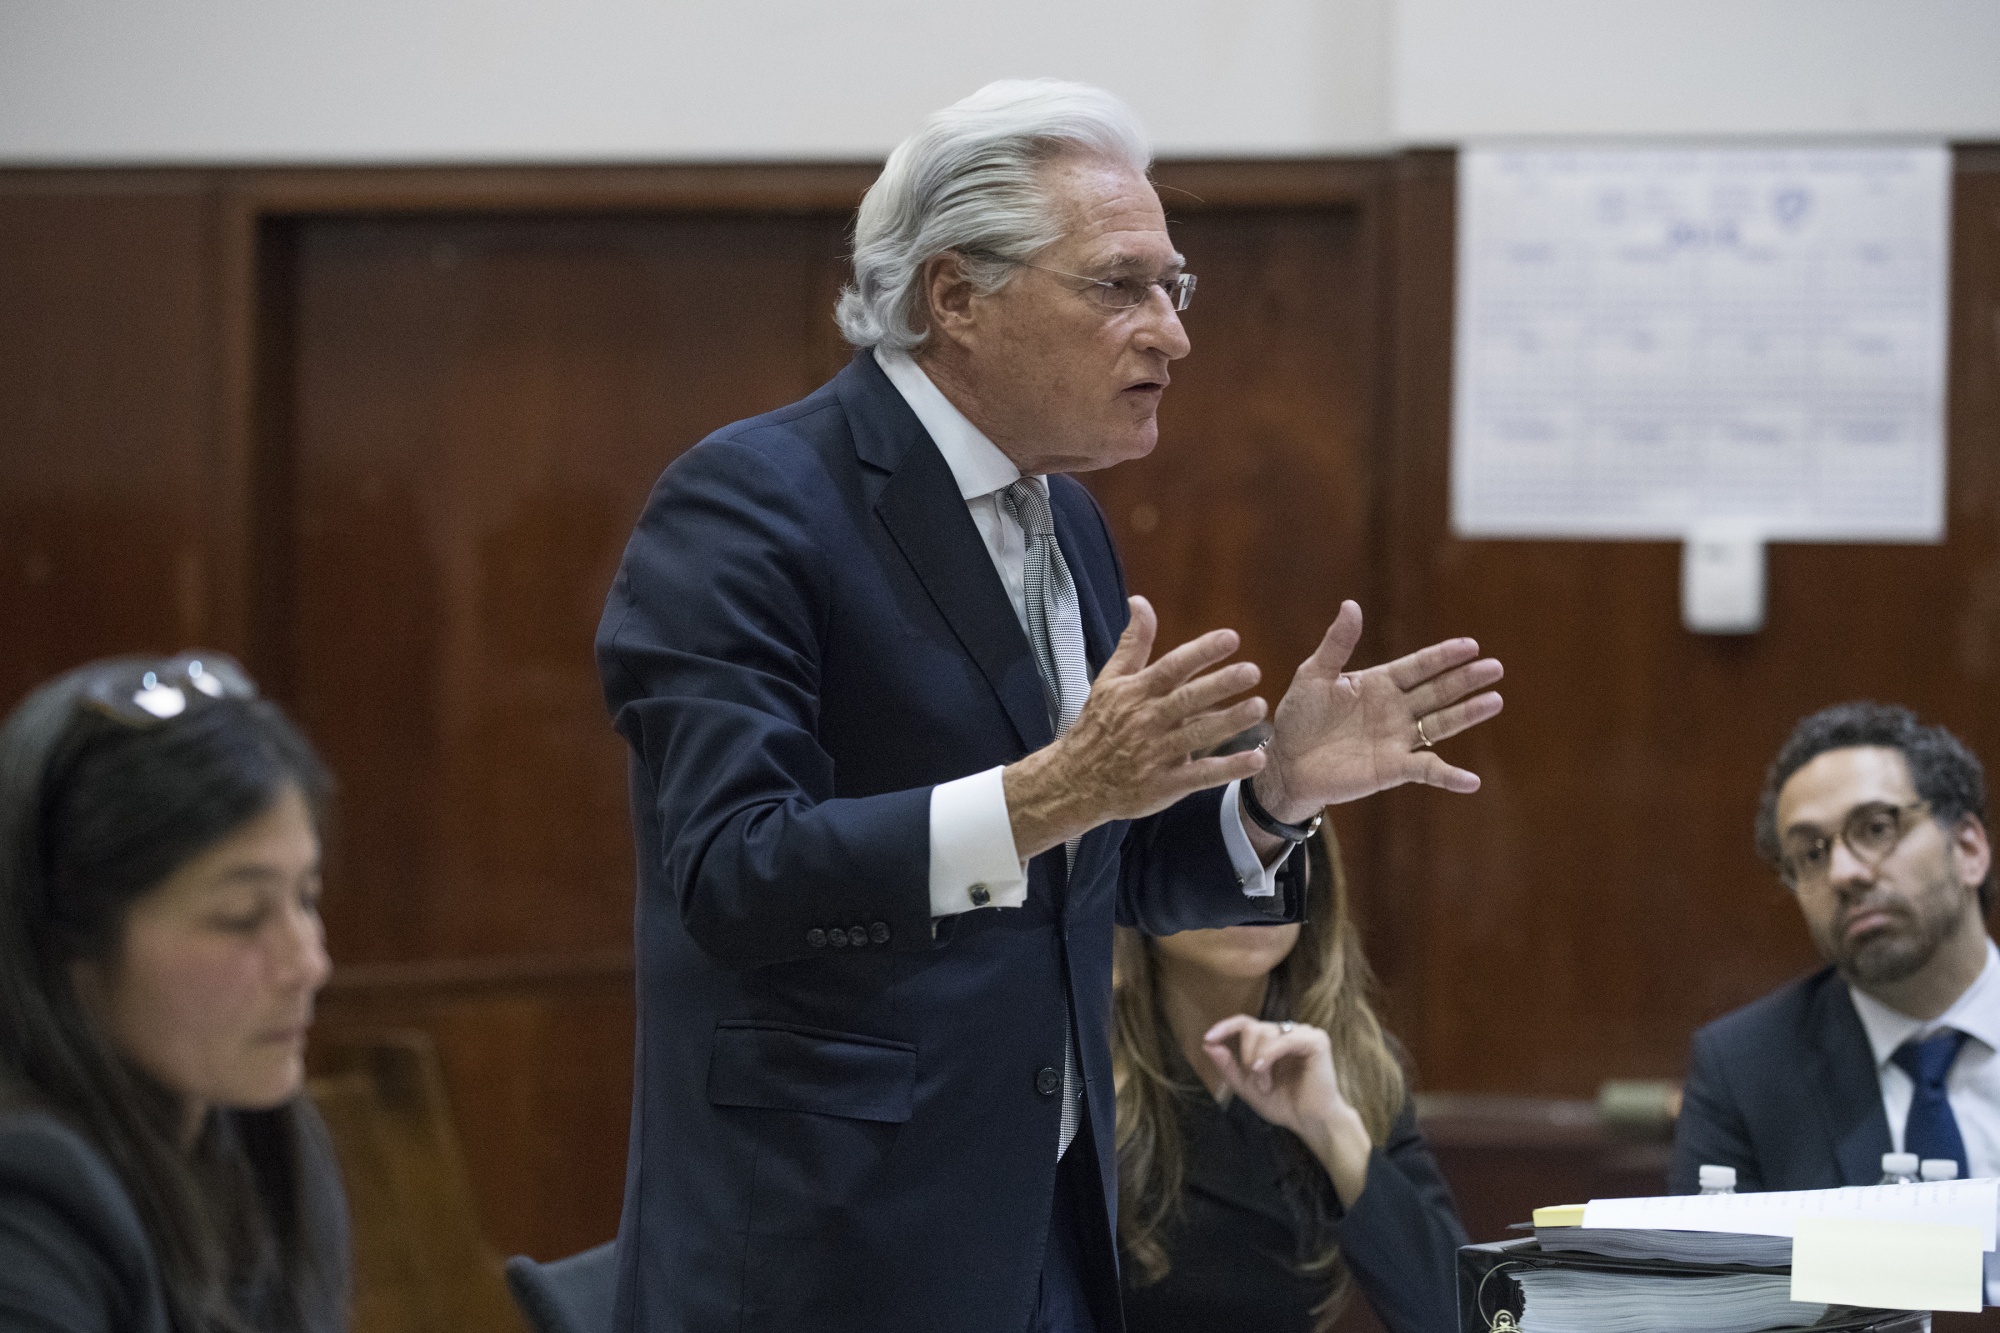 Marc Kasowitz, President Donald Trump's personal attorney, at a court hearing for a defamation suit brought by Summer Zervos, in New York.